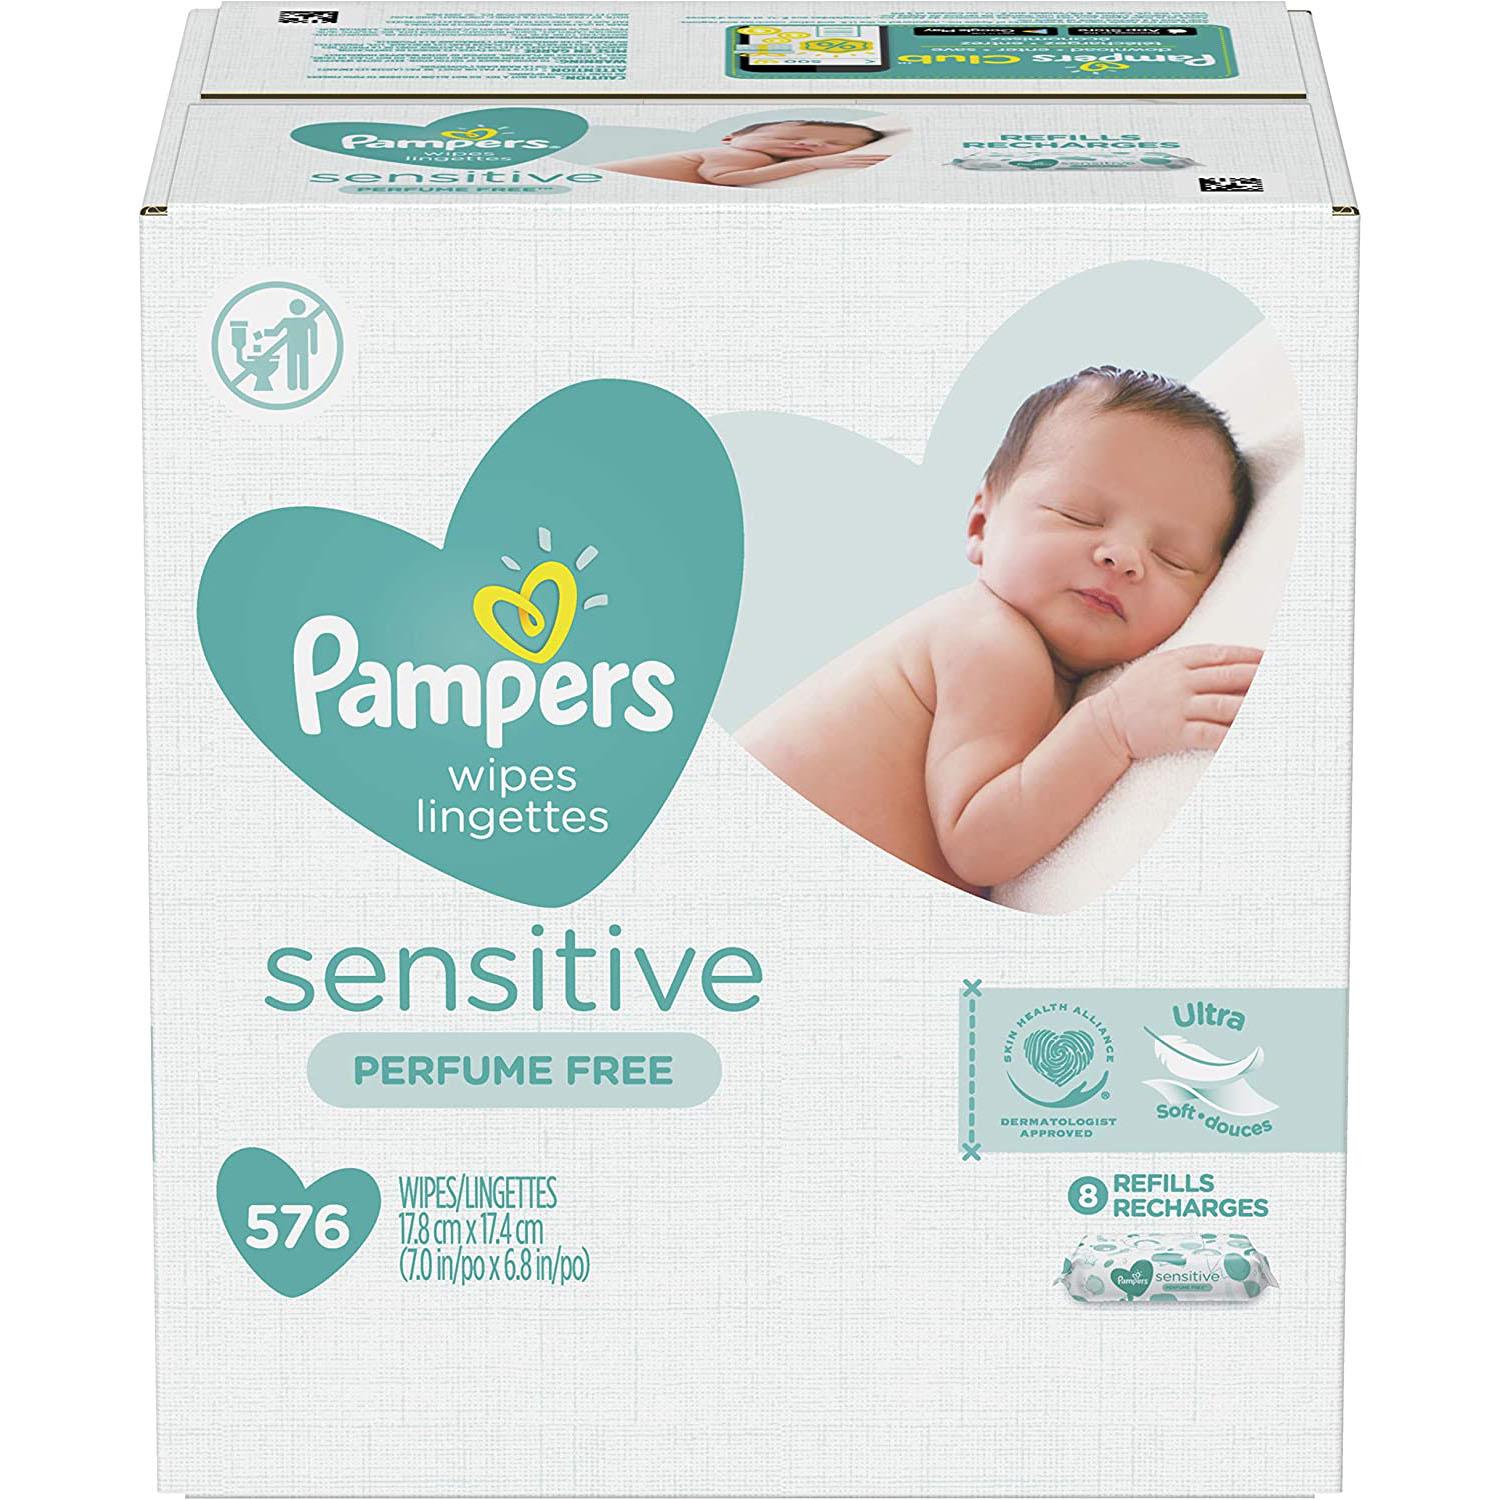 576 Pampers Sensitive Water Based Baby Wipes for $12.86 Shipped